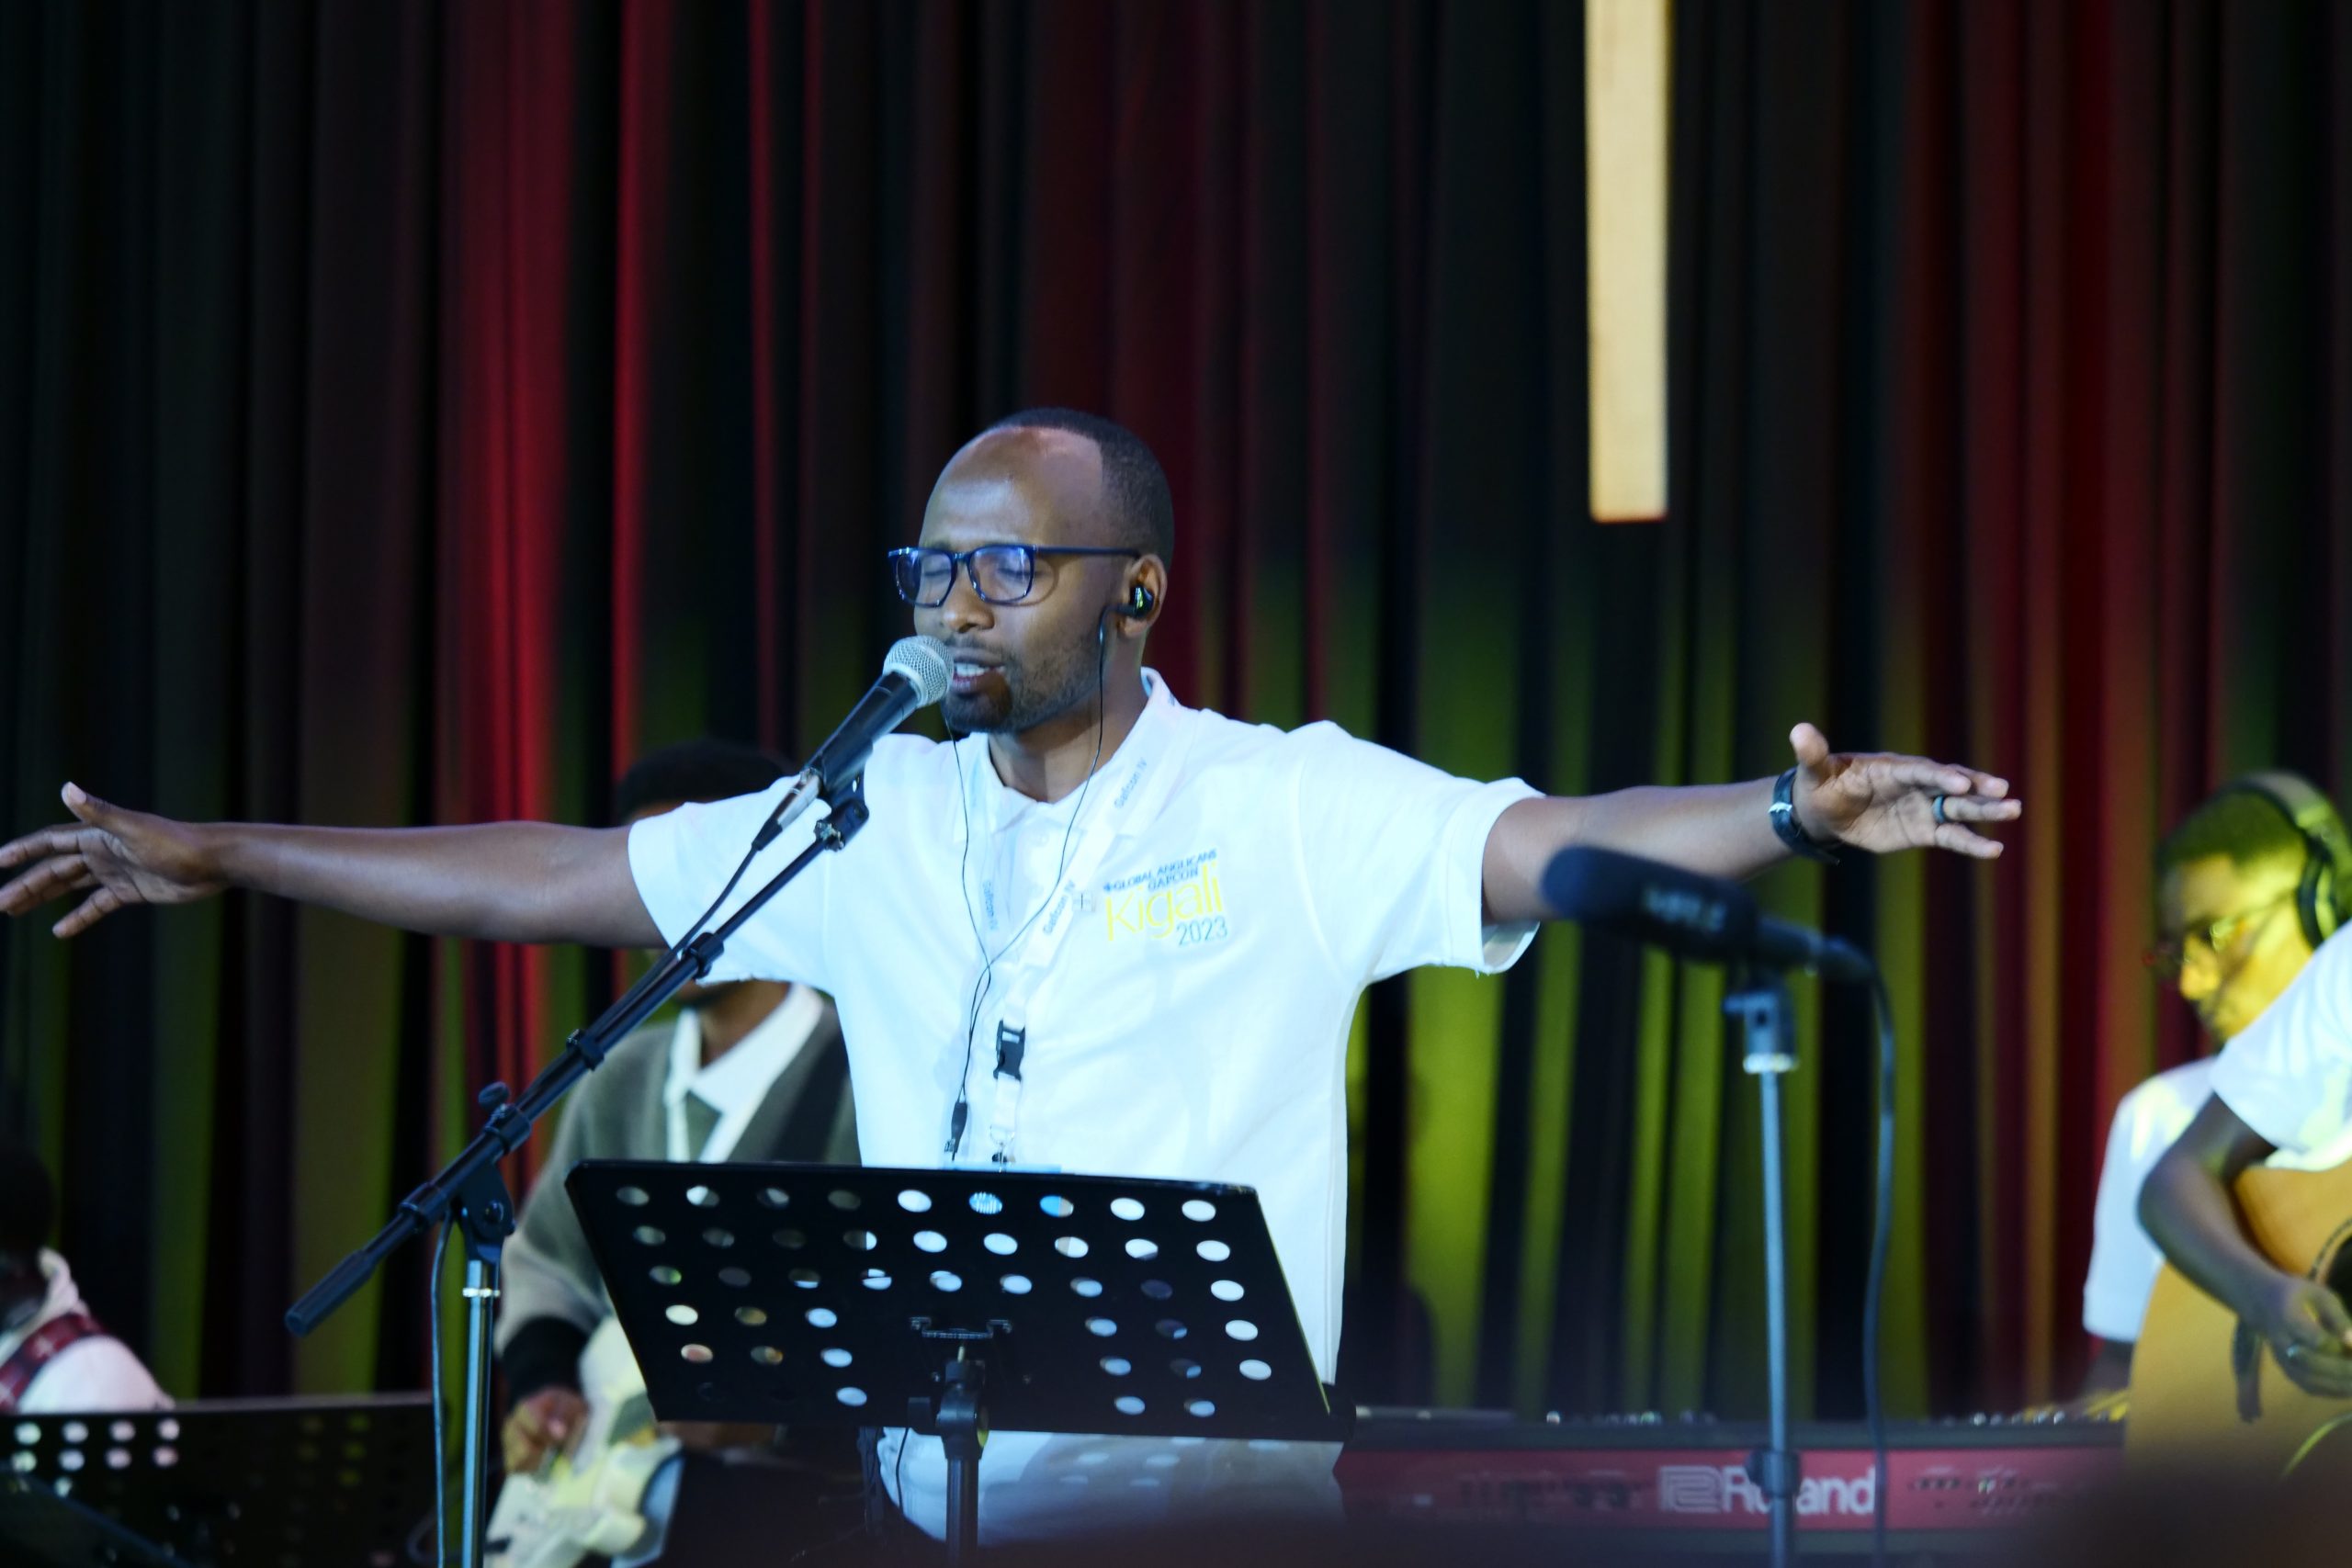 Featured image for “GAFCON Day 3: Morning Worship”